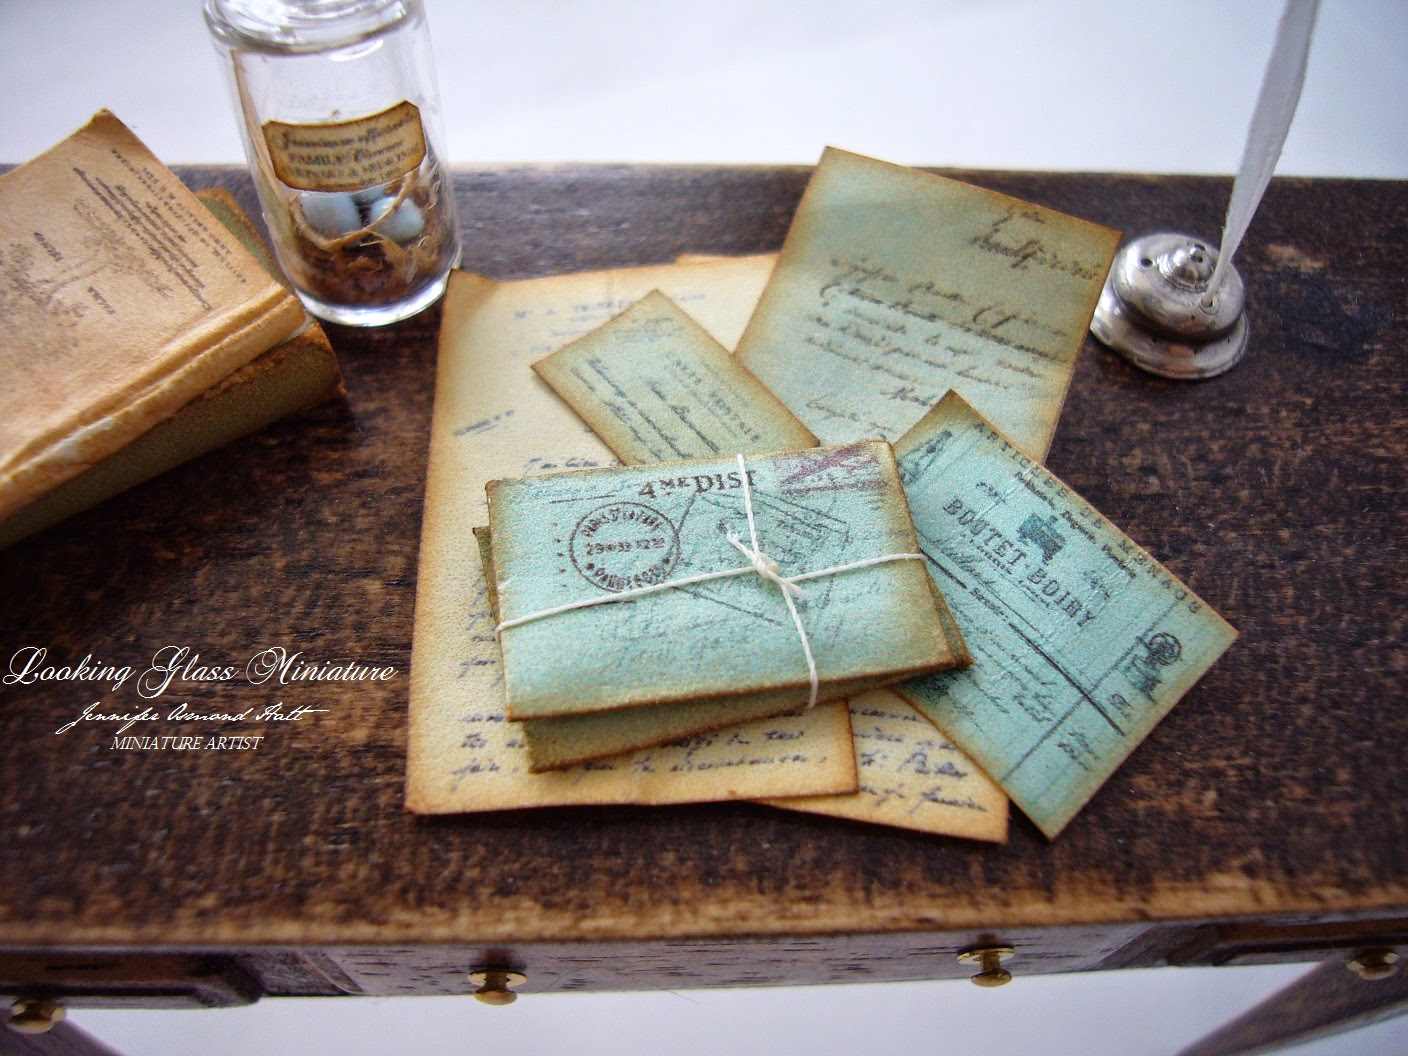 looking glass miniatures: Just listed some new letter sets in my ETSY shop.